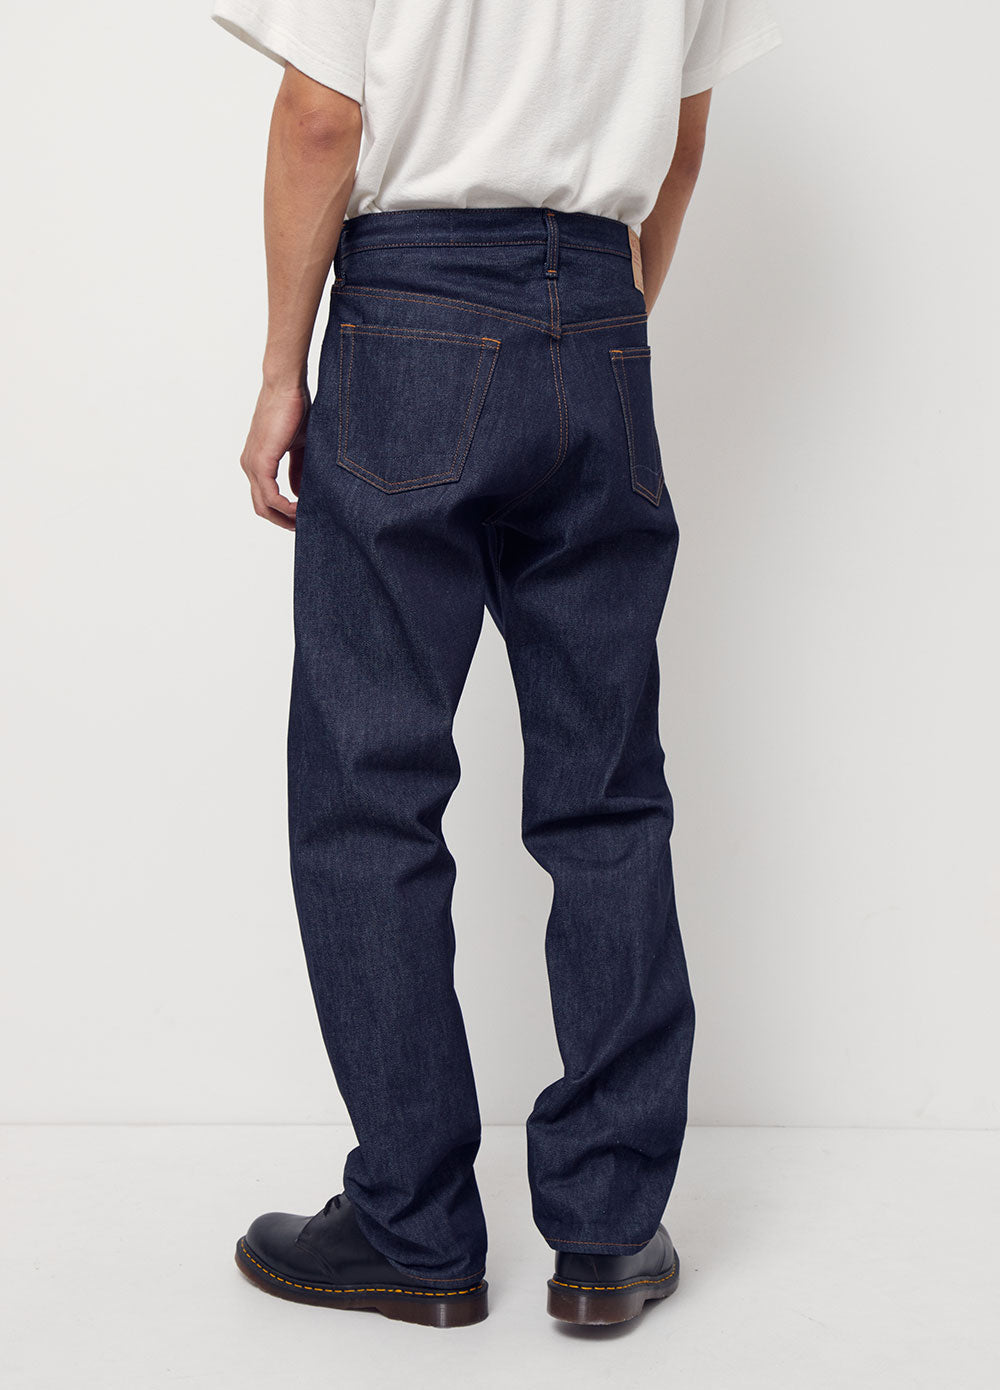 105 90s Jeans